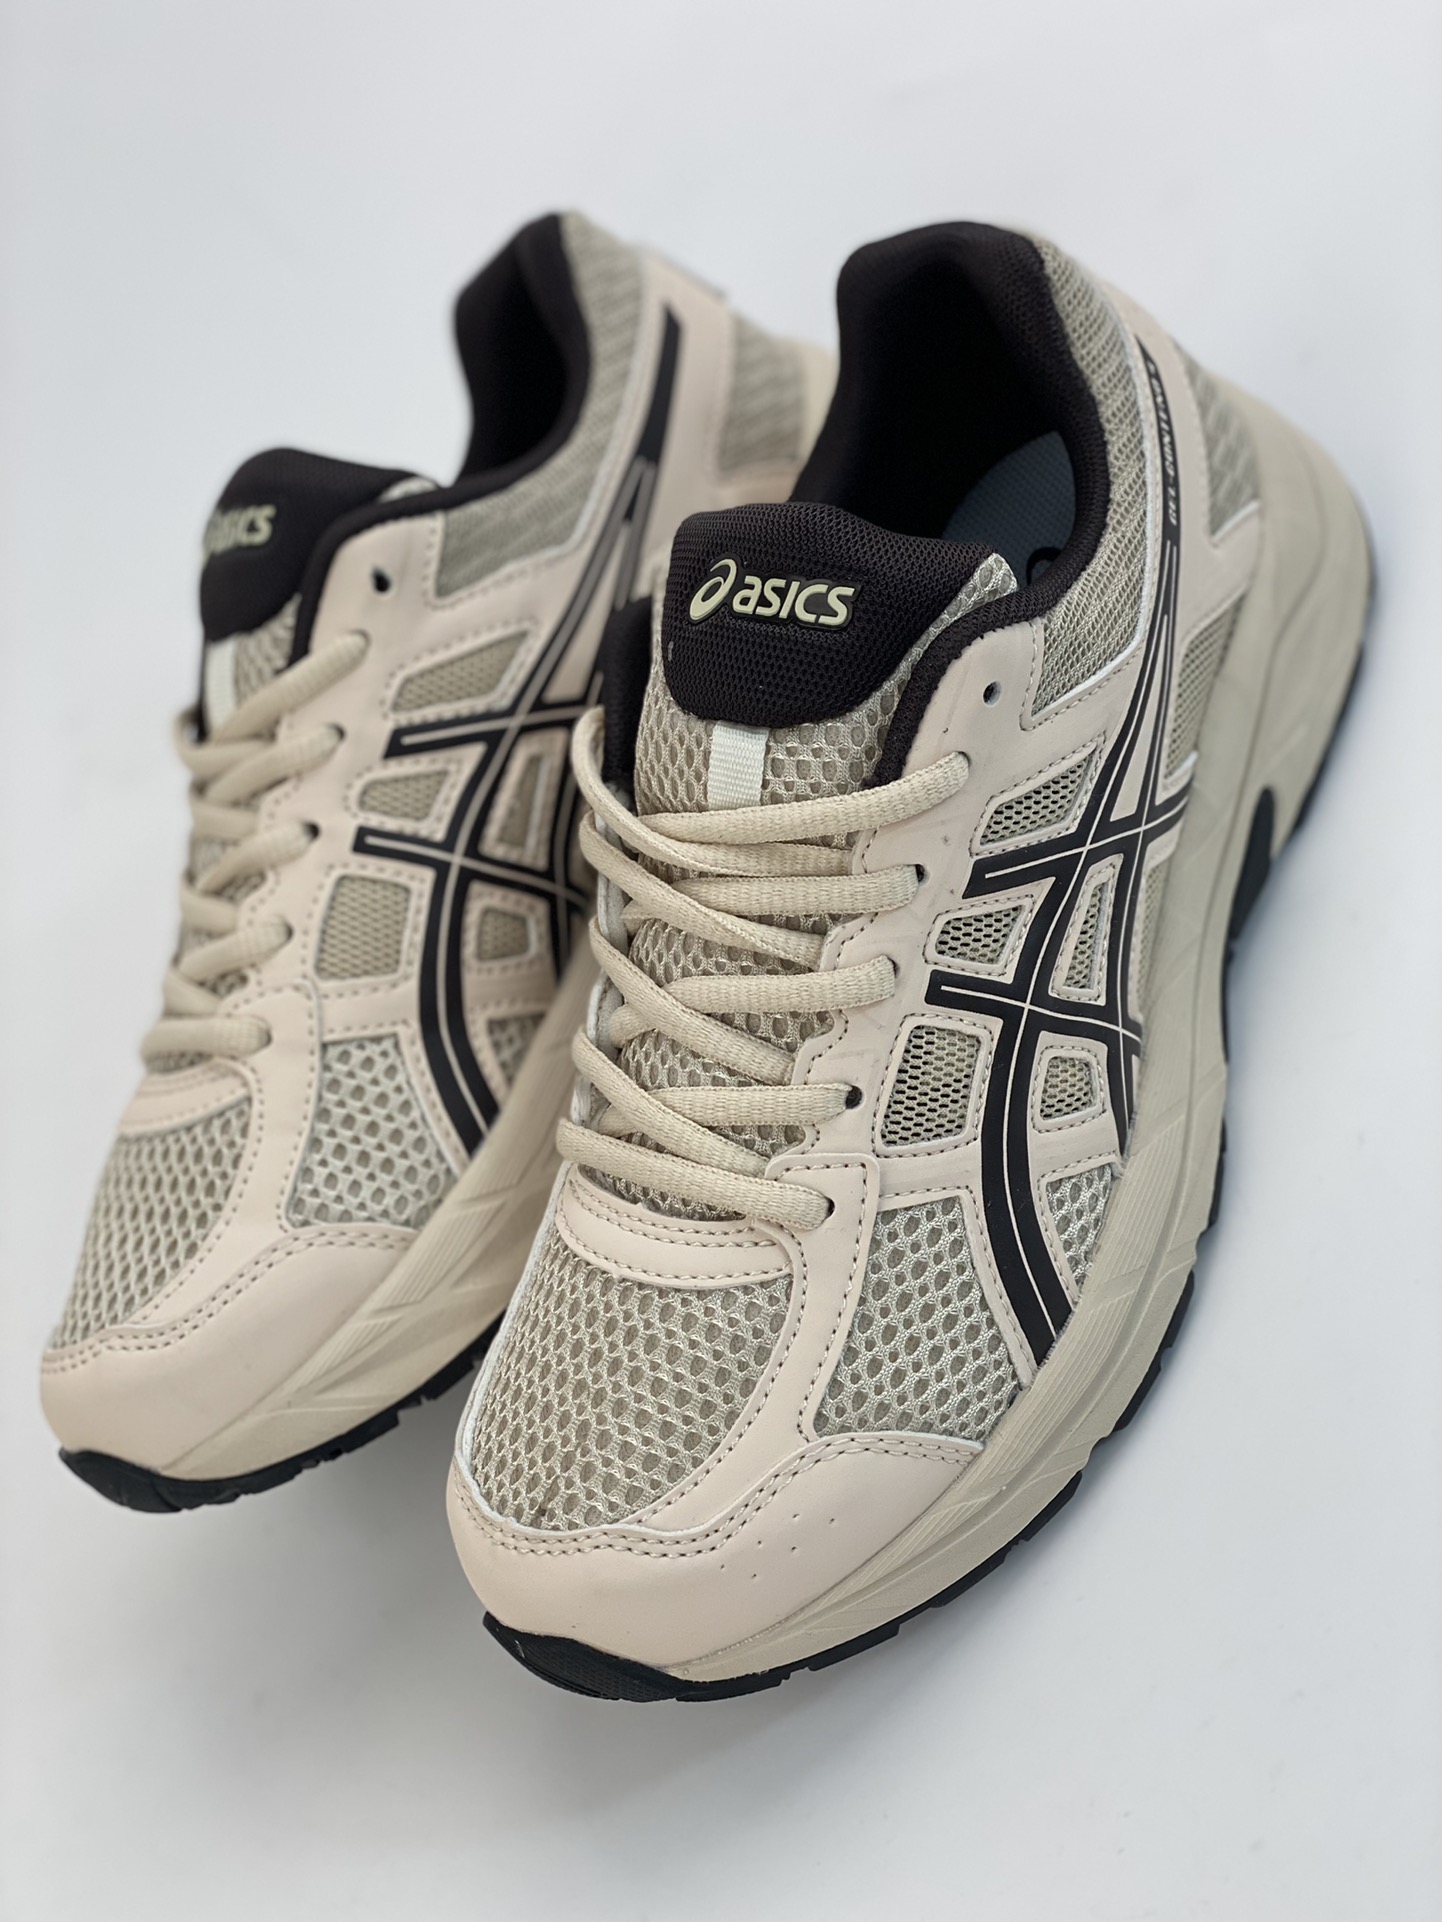 Asics Gel-Contend 4 gray shock-absorbing and non-slip sports running shoes T8D4Q-030